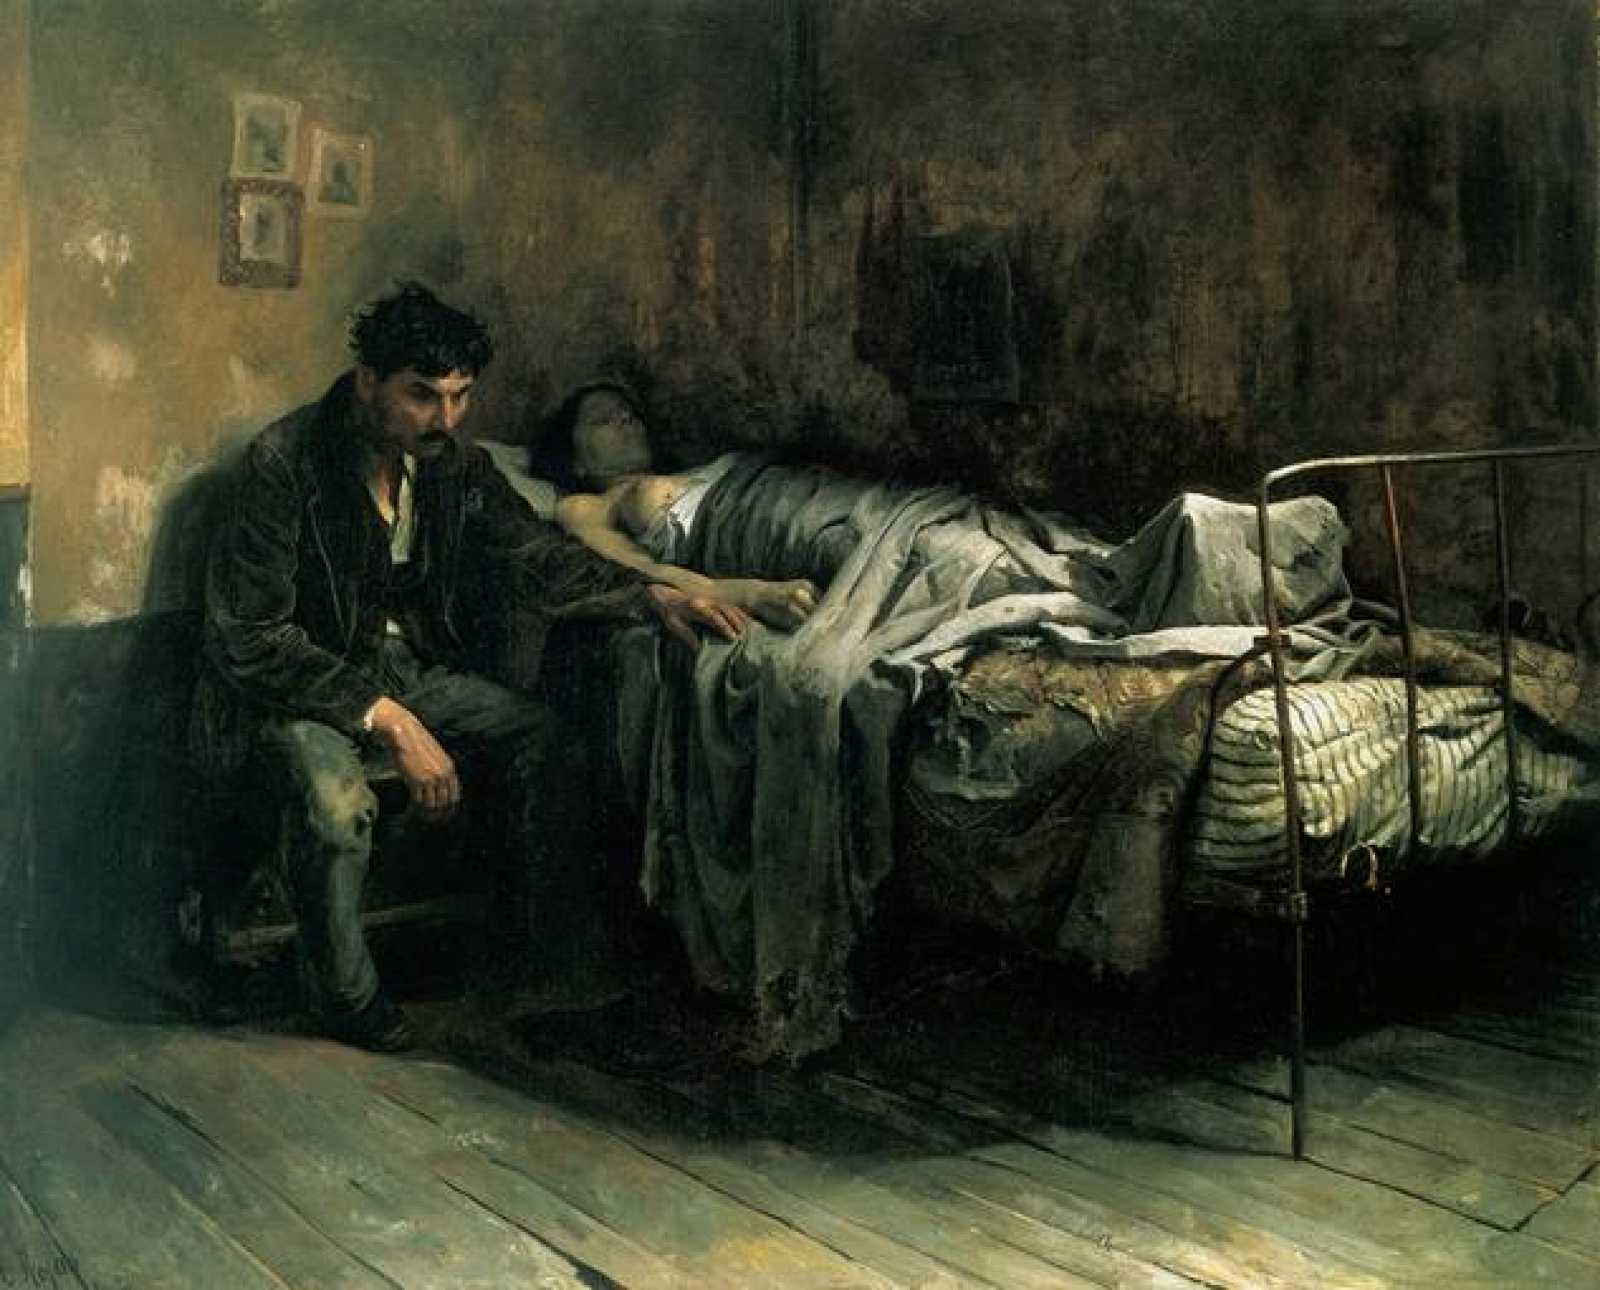 La Miseria by Cristóbal Rojas (1886). Rojas was suffering from chronic tuberculosis when he painted this. Here he depicts the social aspect of the disease, and its relation with living conditions at the close of the 19th century. Painting by: Cristóbal Rojas, 1886 (Public Domain)